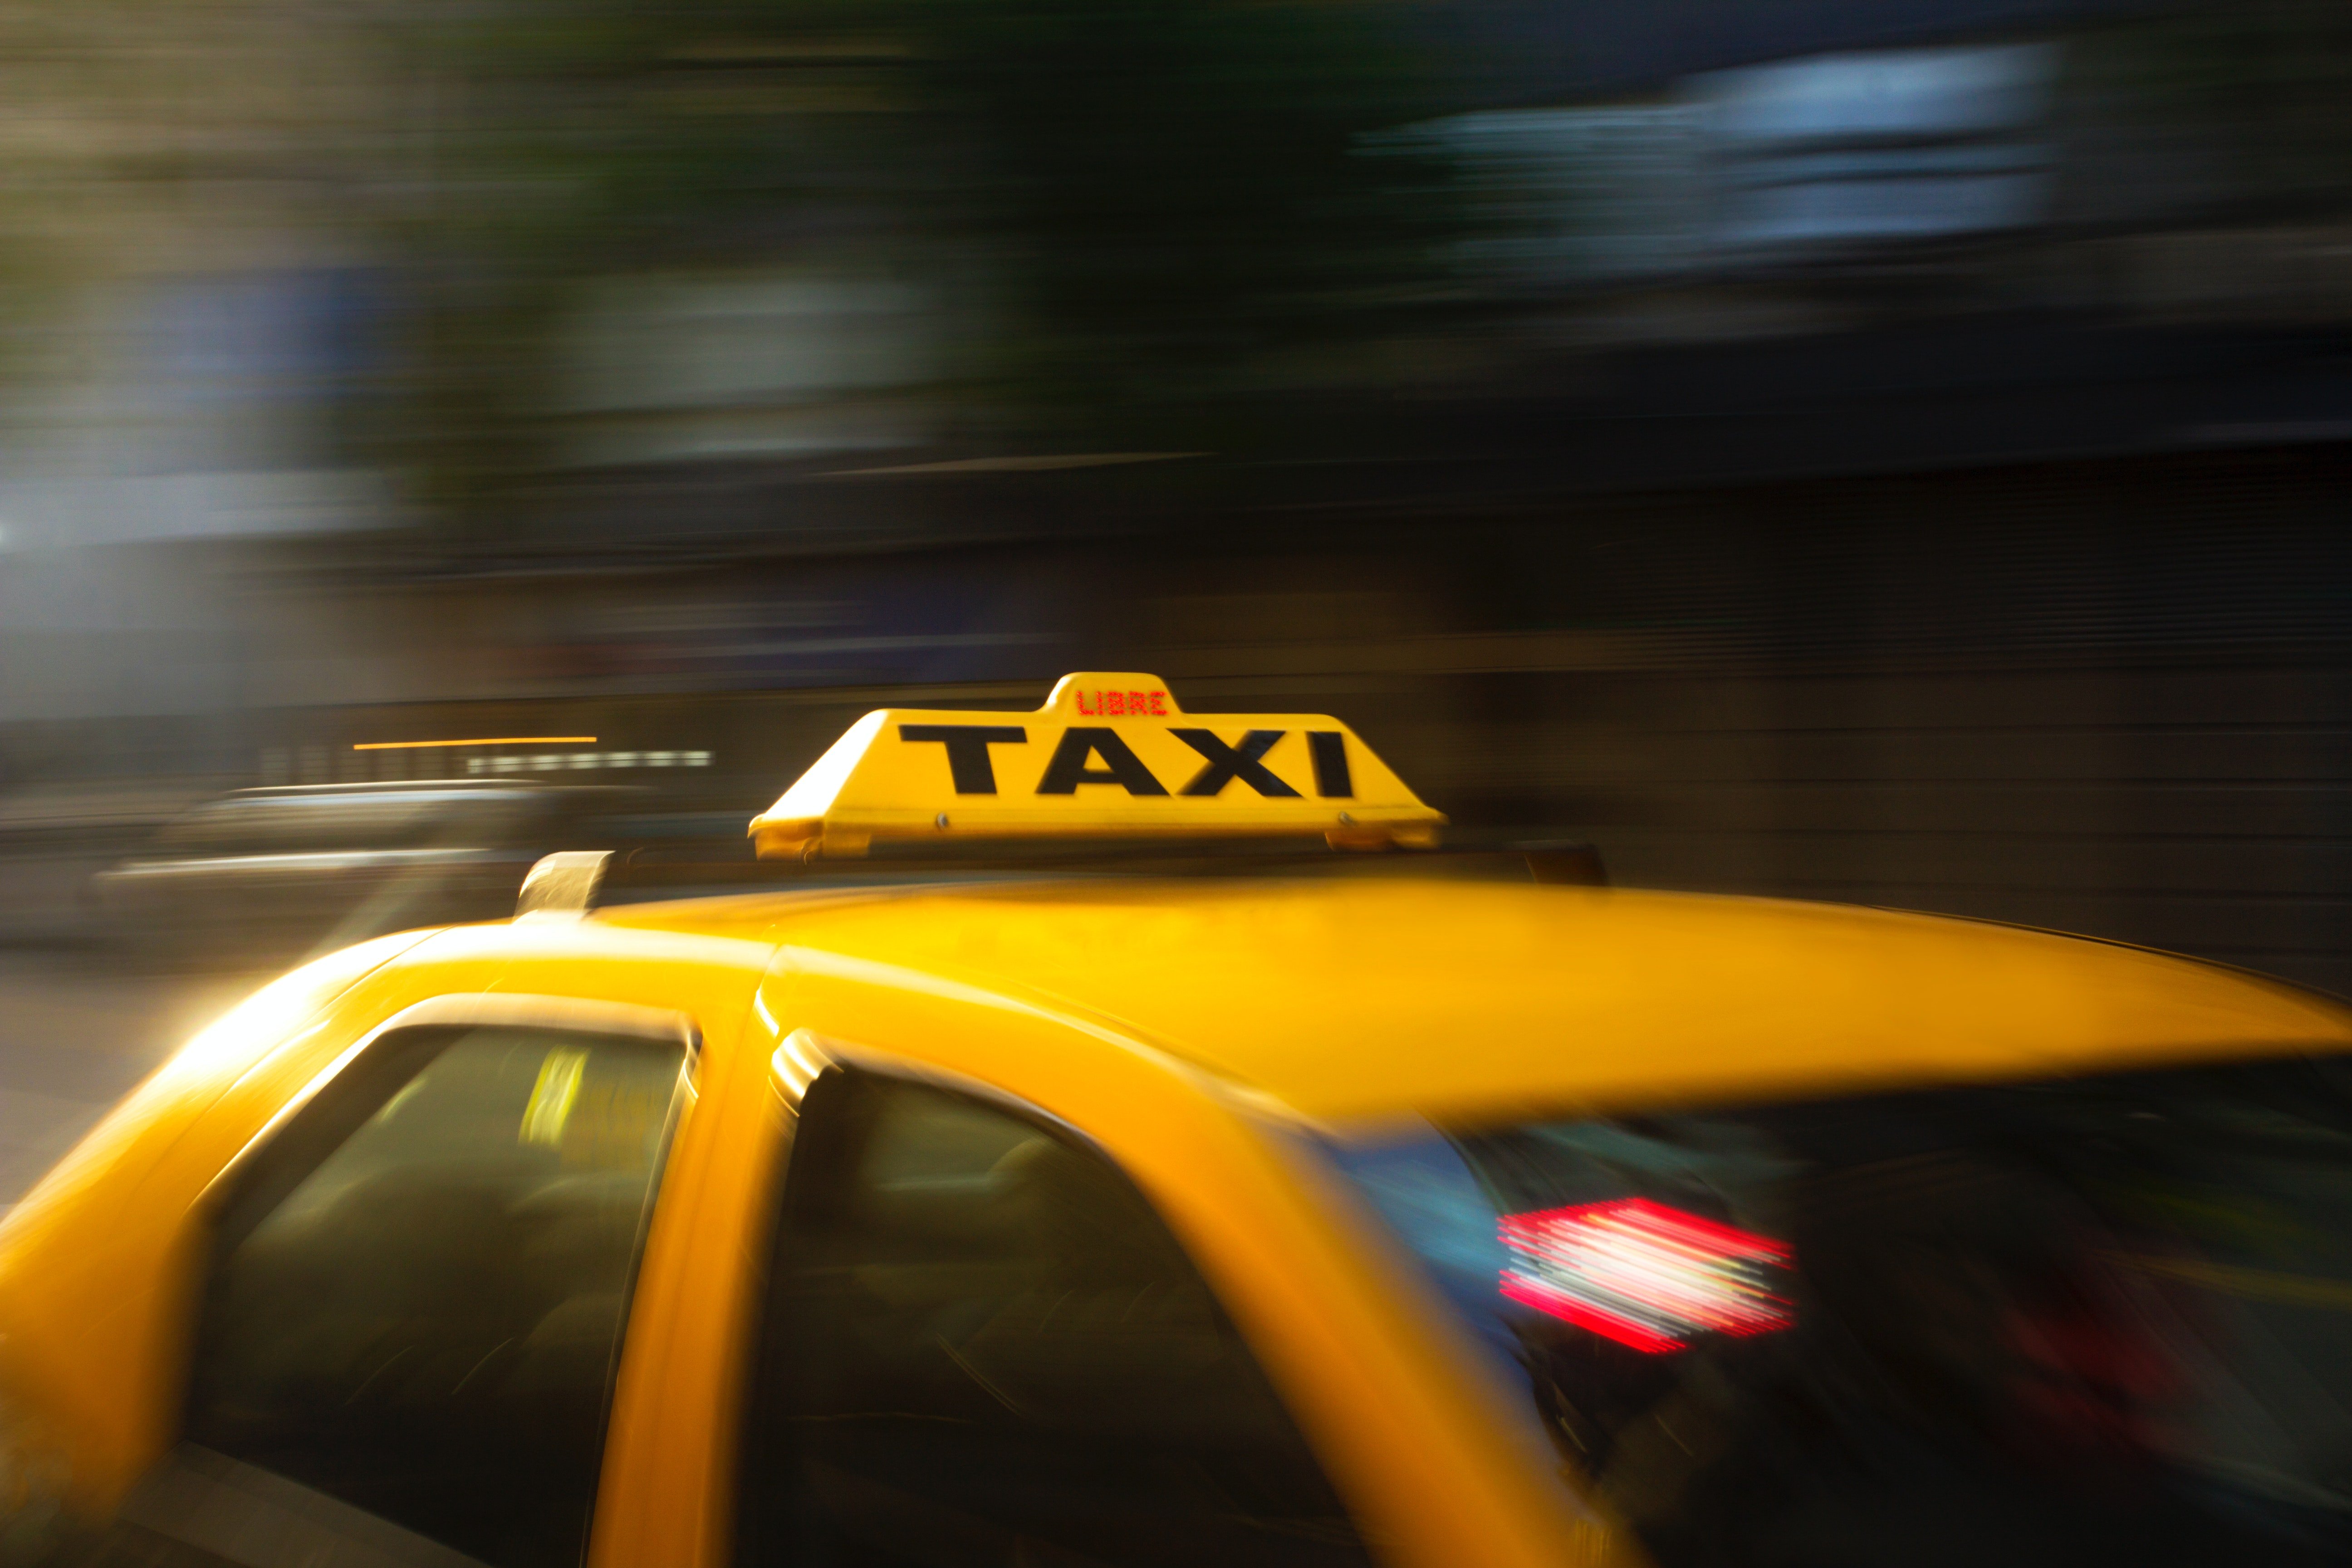 Joe parked his taxi to help Emily find her daughter. | Source: Pexels